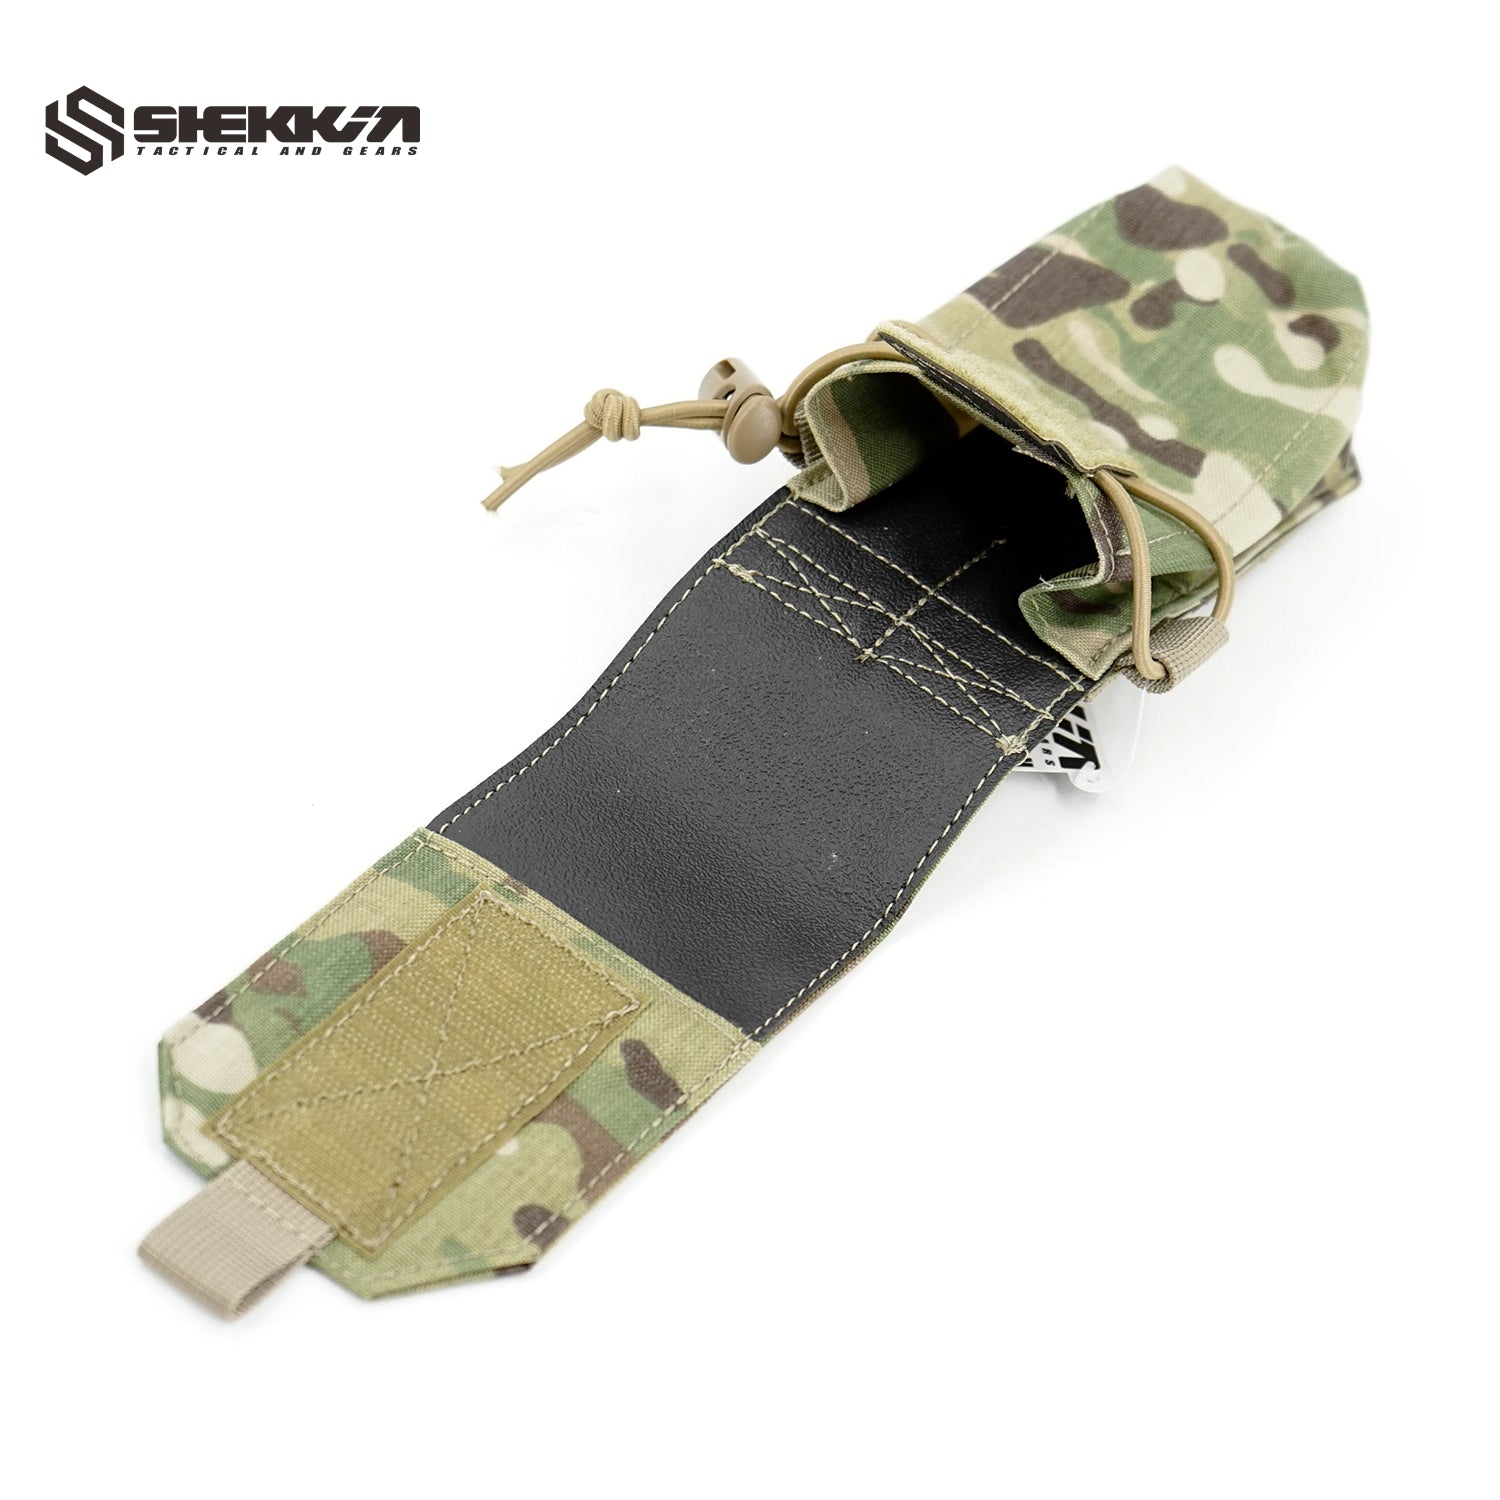 Shekkingears replica TT style tiered M4 556 mag Pouch